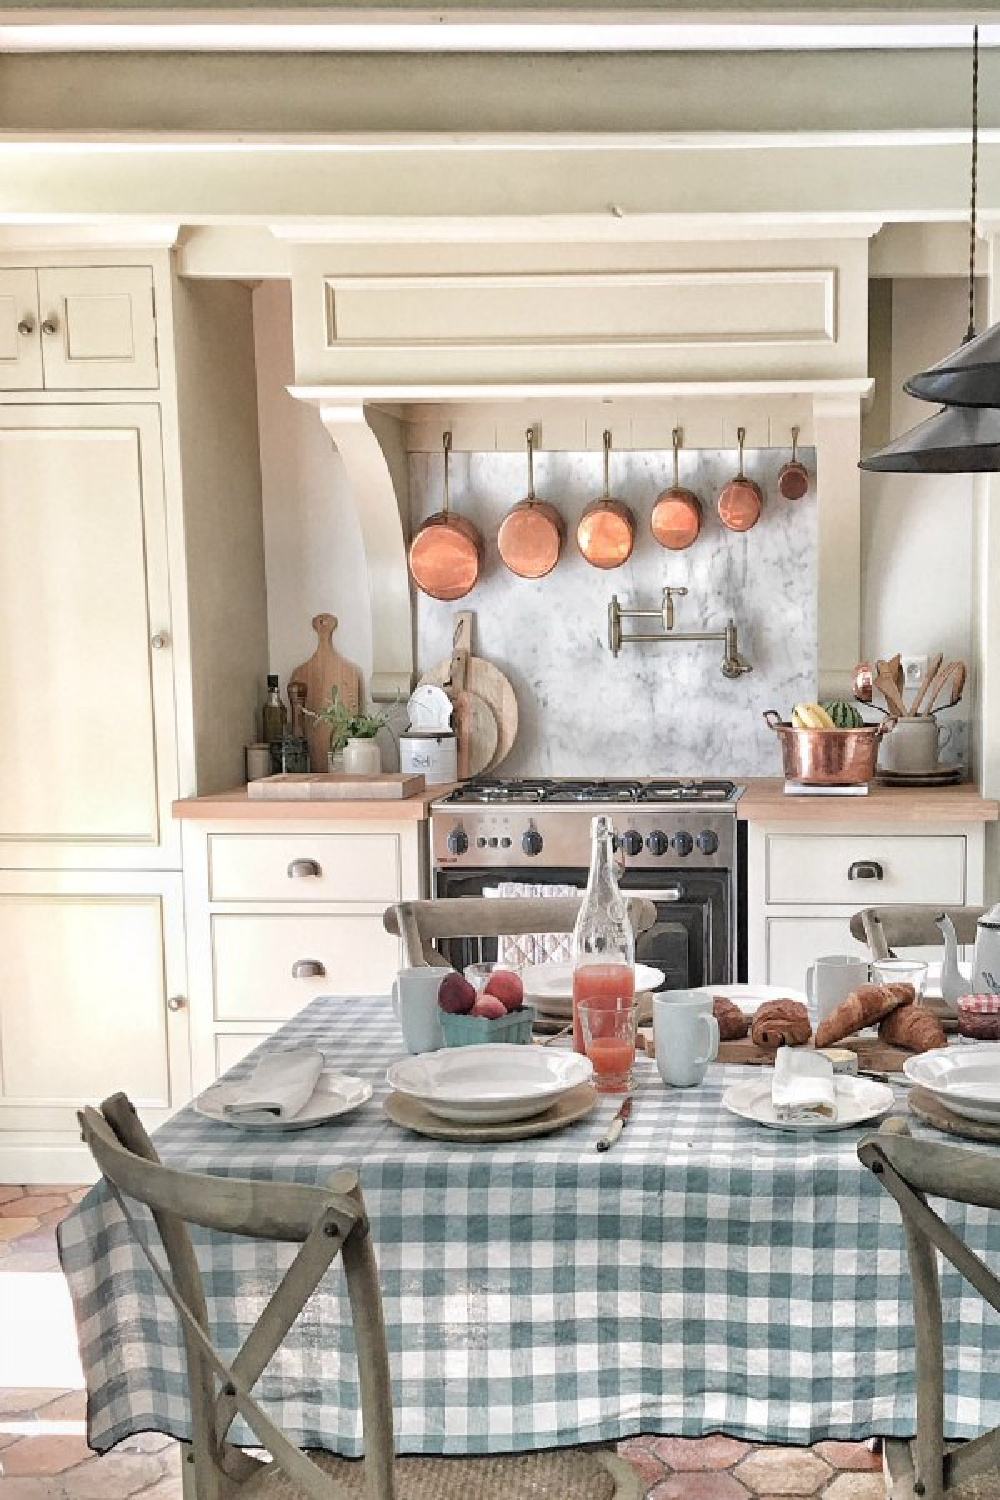 Rustic French farmhouse kitchen with beams, terracotta hex tile floor, putty cabinets, and traditional charm - Vivi et Margot. #frenchfarmhouse #kitchens